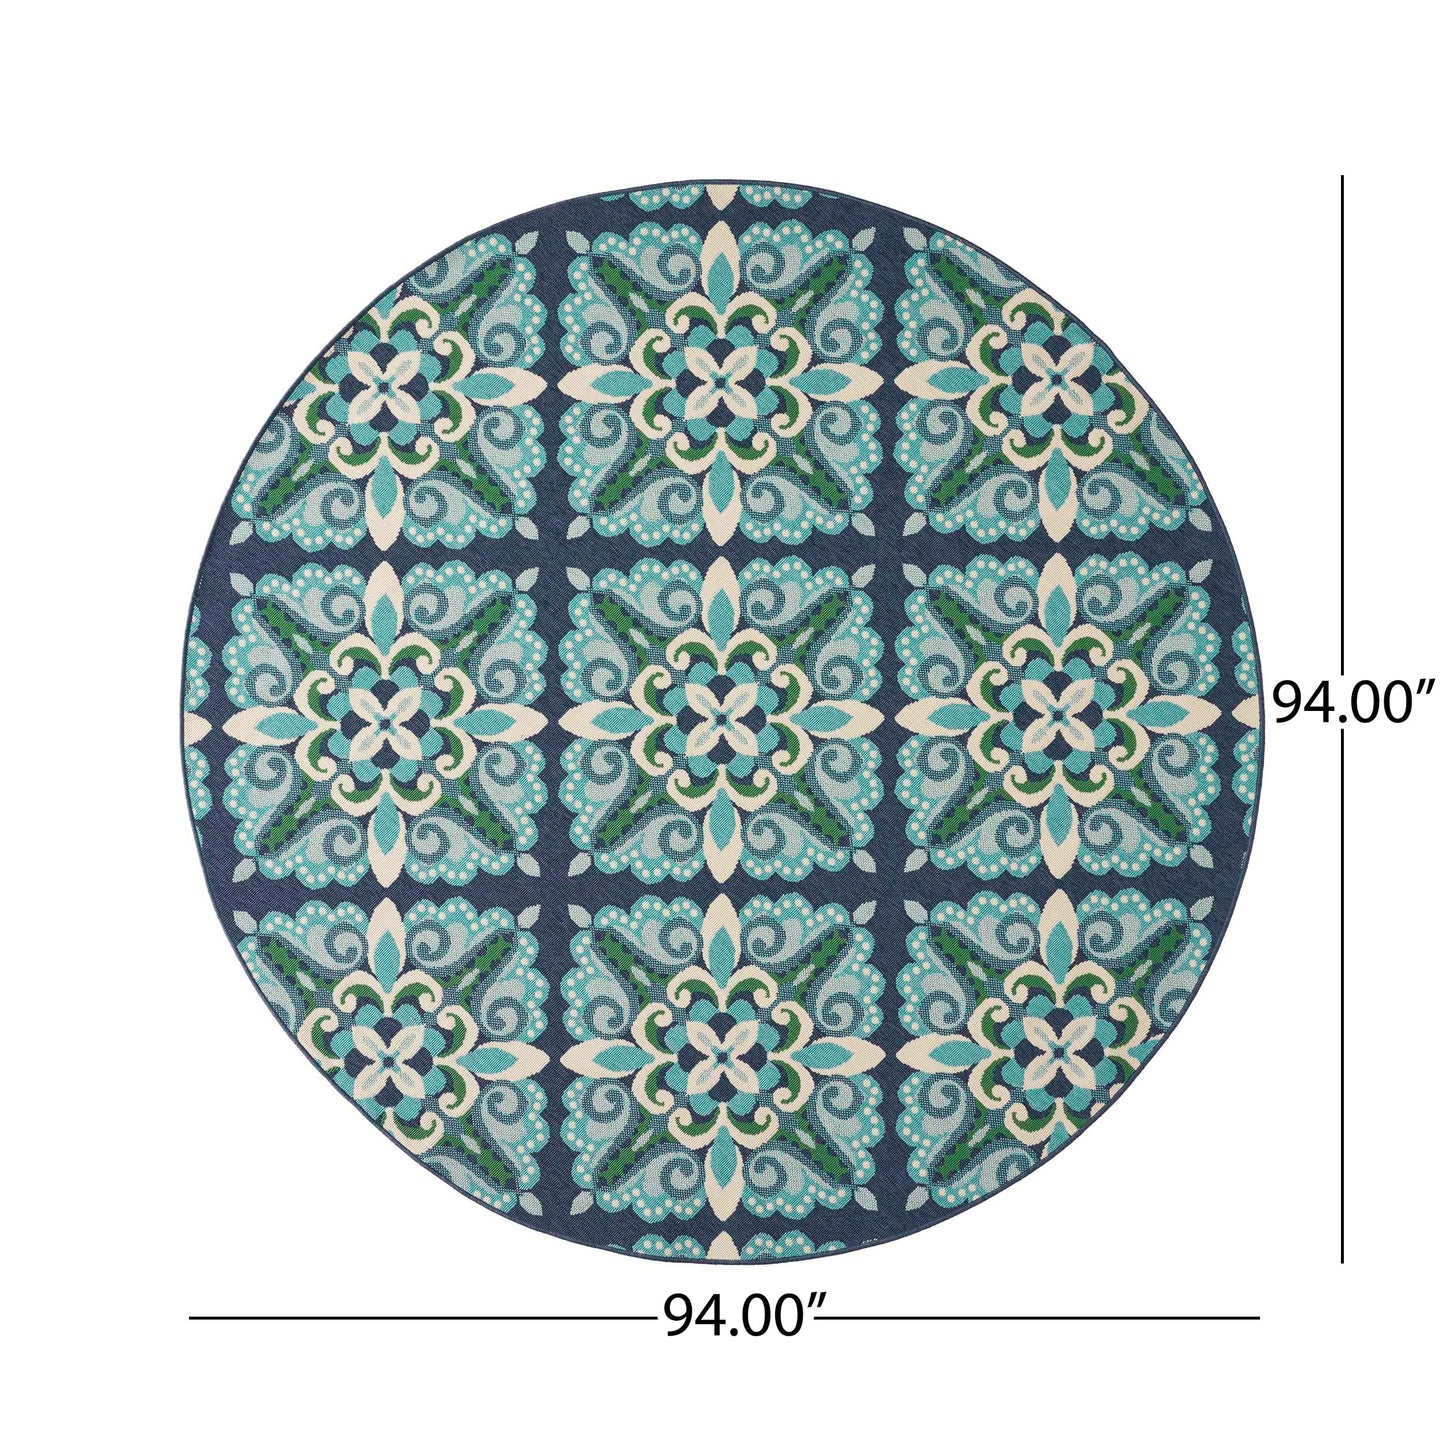 Pazel Indoor/Outdoor Floral Area Rug, Blue and Green